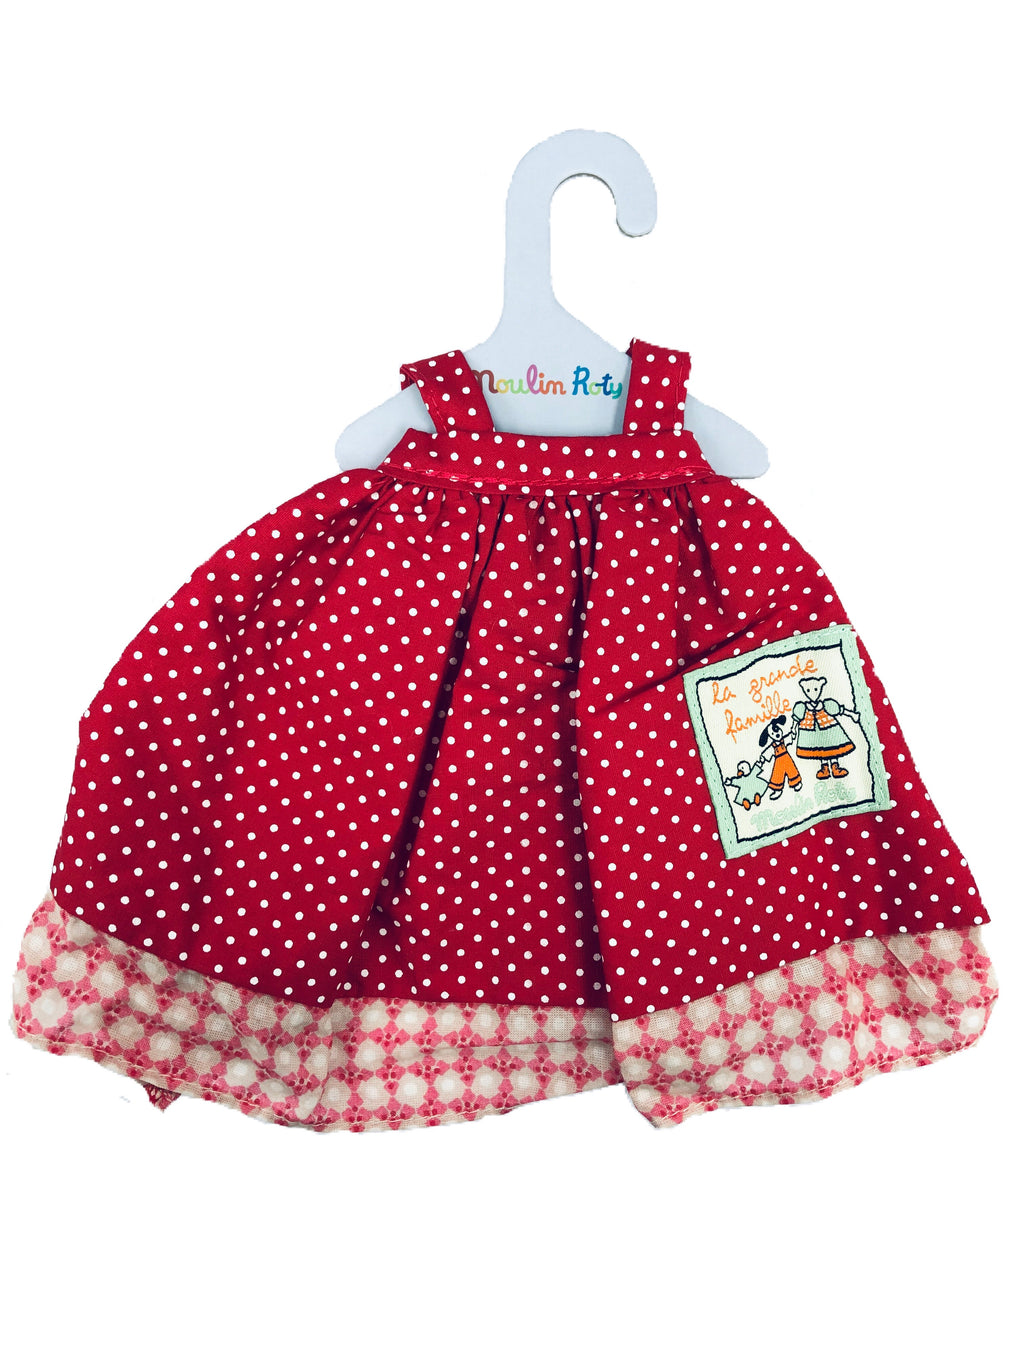 Made from the finest fabrics from France, this elegant red dress comes with a little hanger and is suited to dress La Grande Famille characters (30cm). 